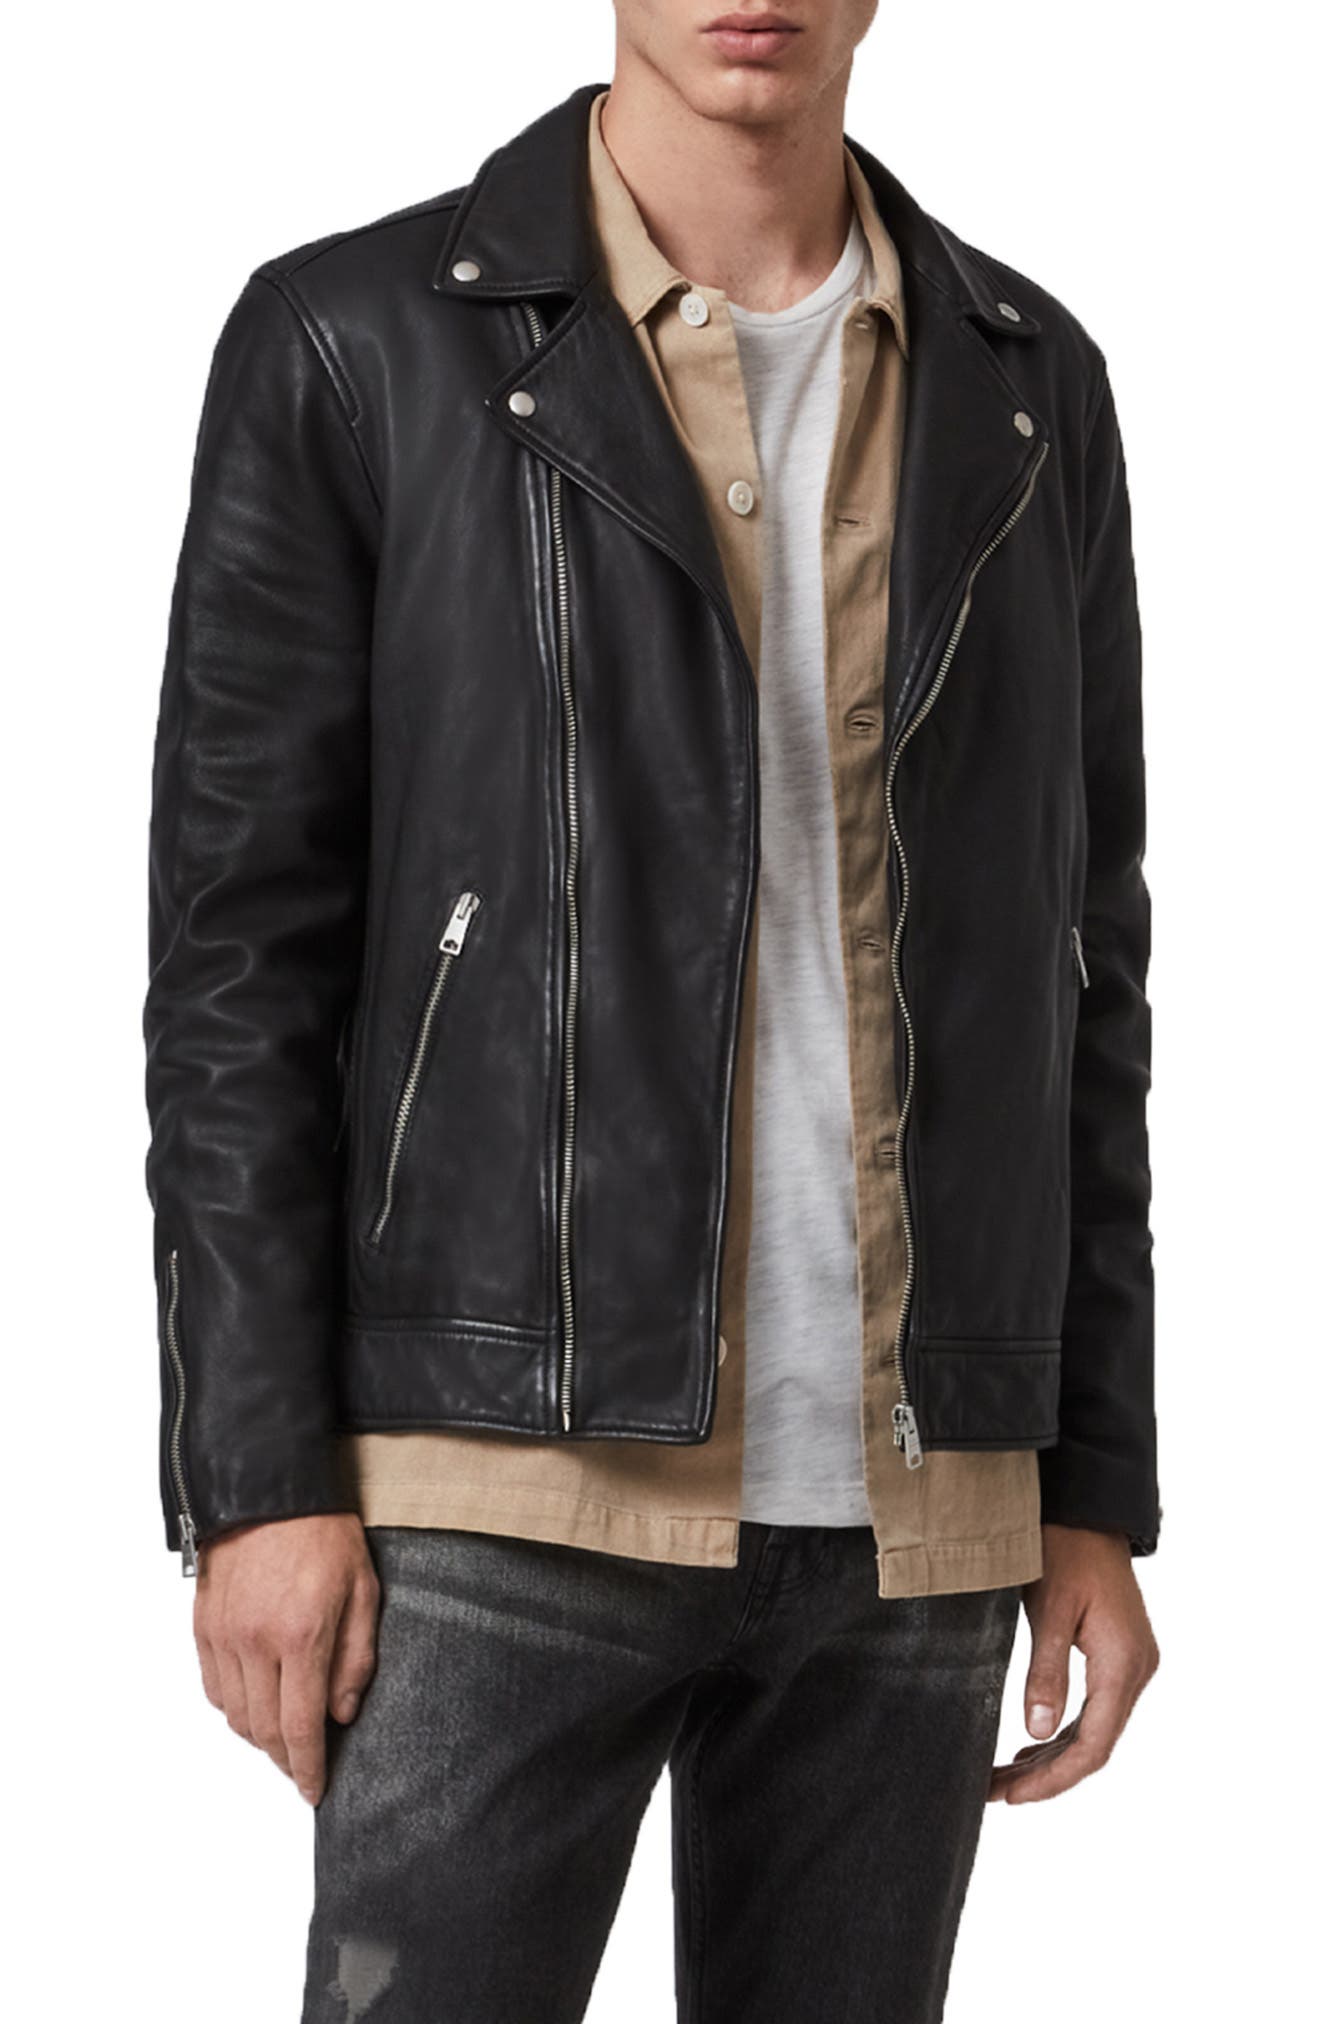 iLXHD Faux Leather Jackets for Men PU Black Brown Leather Jacket Coats Outwear